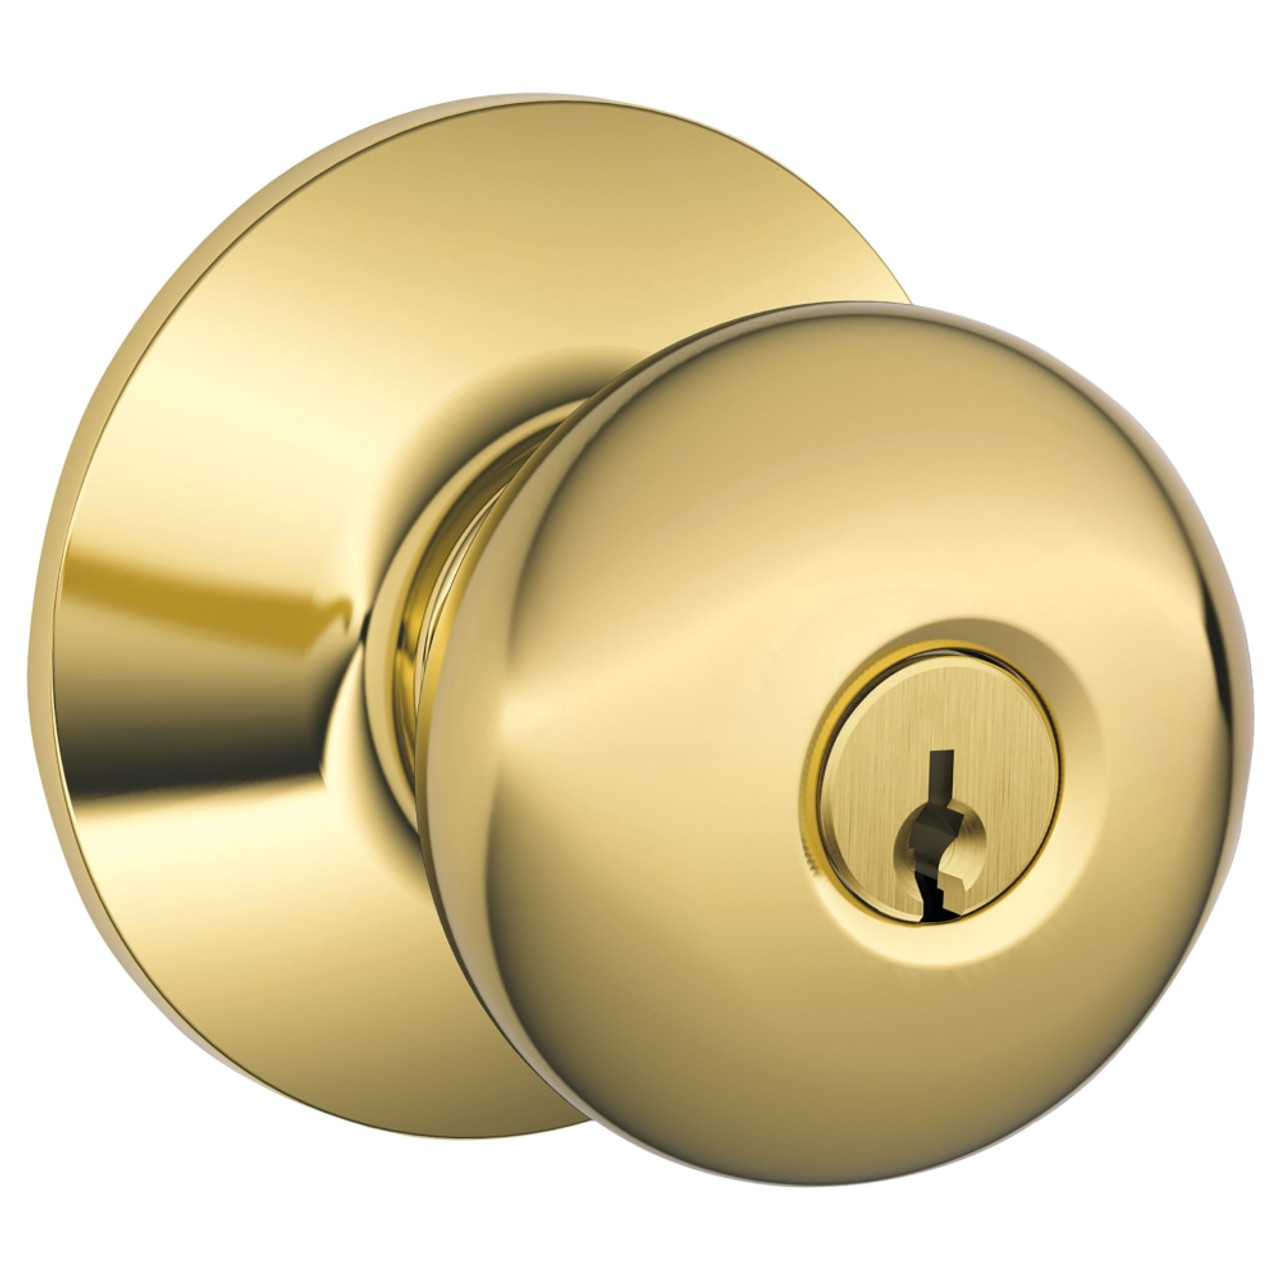 Schlage Residential F51A PLY 505 KA4 Grade Entry Lock Plymouth Knob  Conventional Cylinder Keyed Alike Lifetime Bright Brass Finish Not Handed  B and H Depot Door Hardware Shop